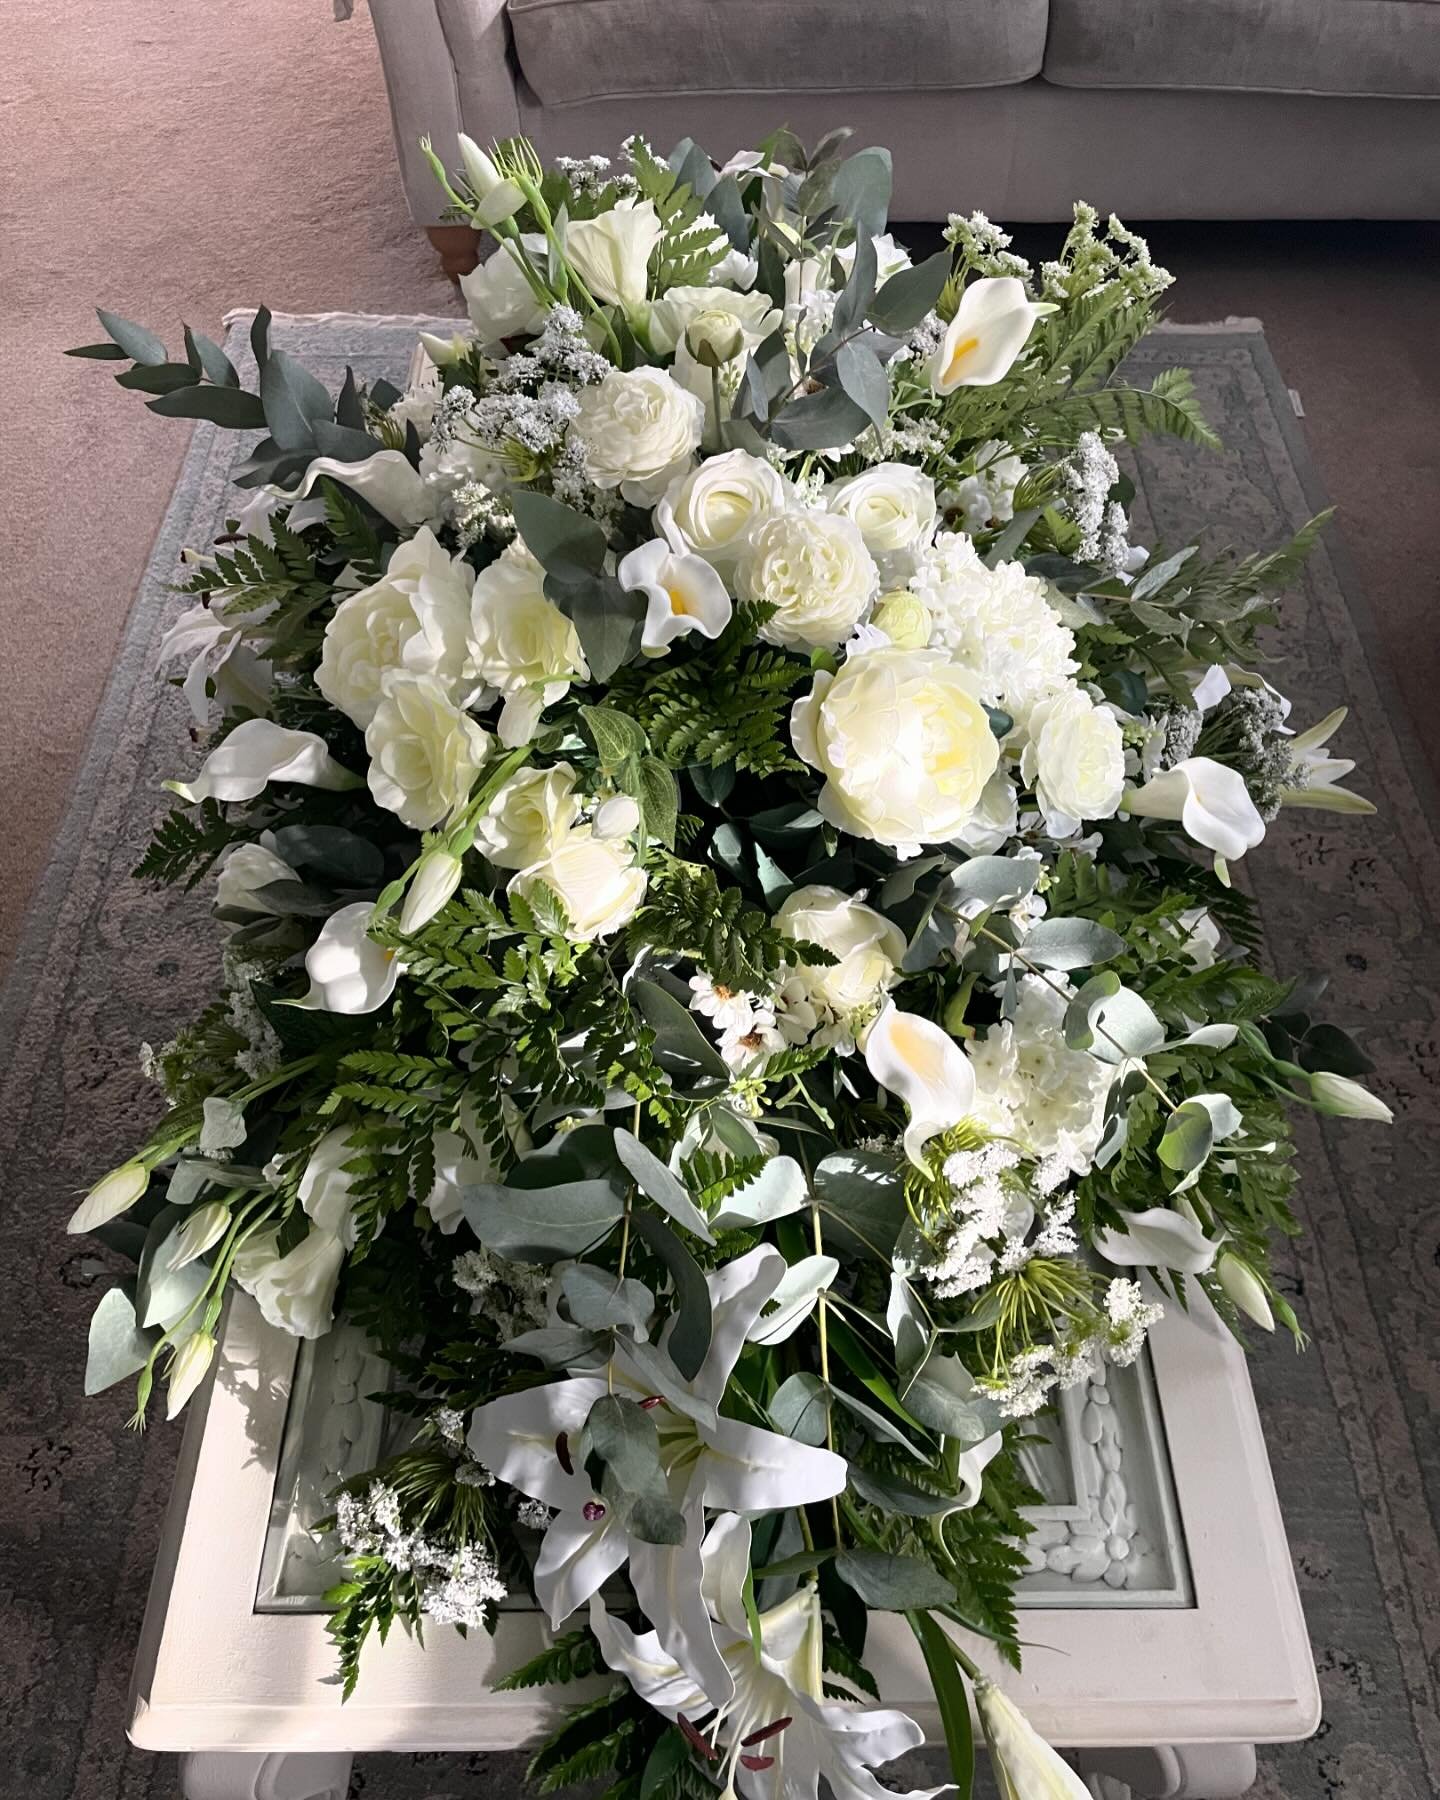 So many messages thank you. I made the casket flowers using fresh foliage and all faux flowers. The flowers will then be used in a memorial arbour. This way they can be forever. Off tomorrow and Wednesday thank you again for all the love #funeralspra